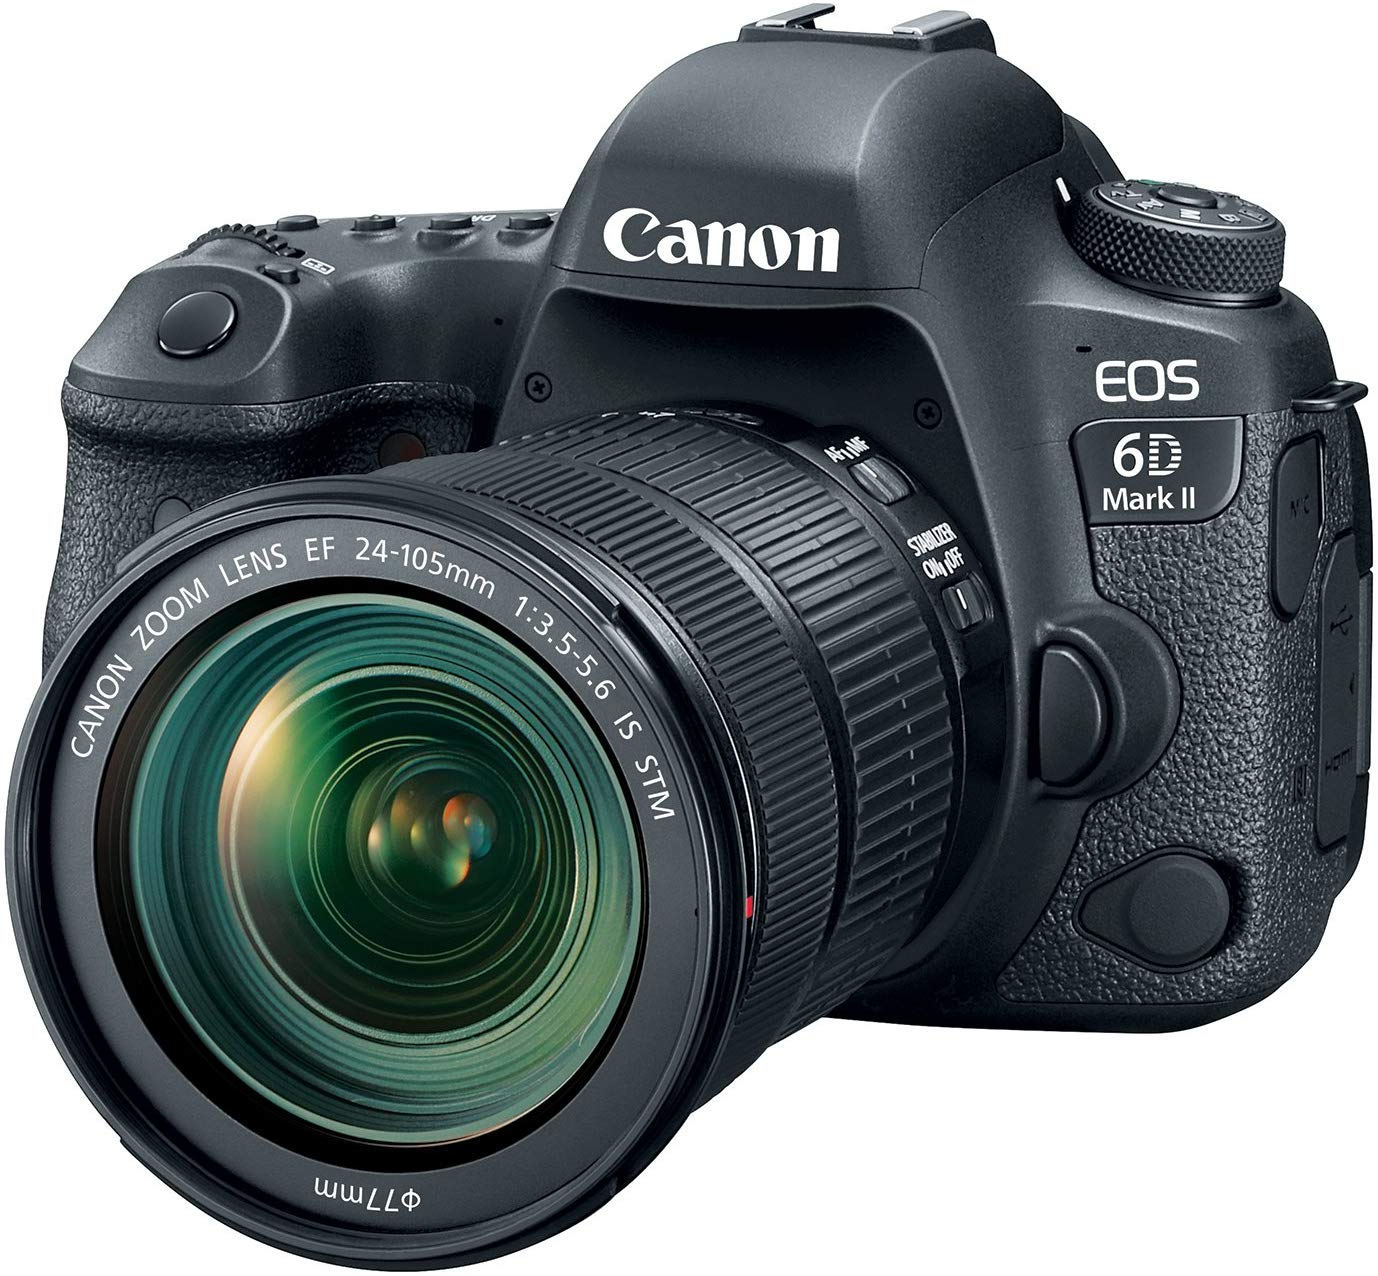 Canon EOS 6D Mark II Review